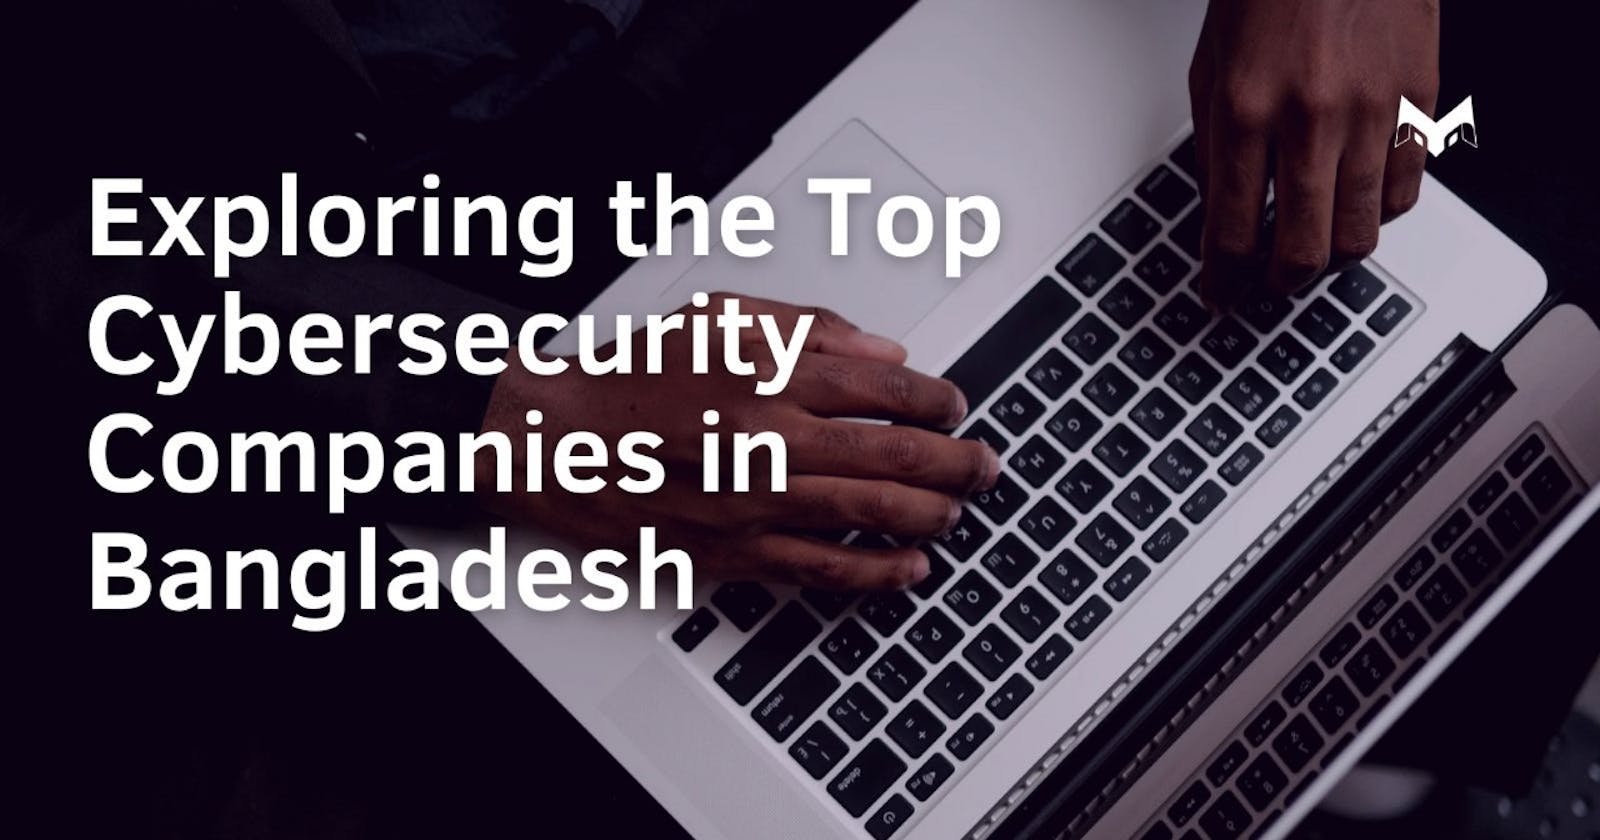 Exploring the Top Cybersecurity Companies in Bangladesh